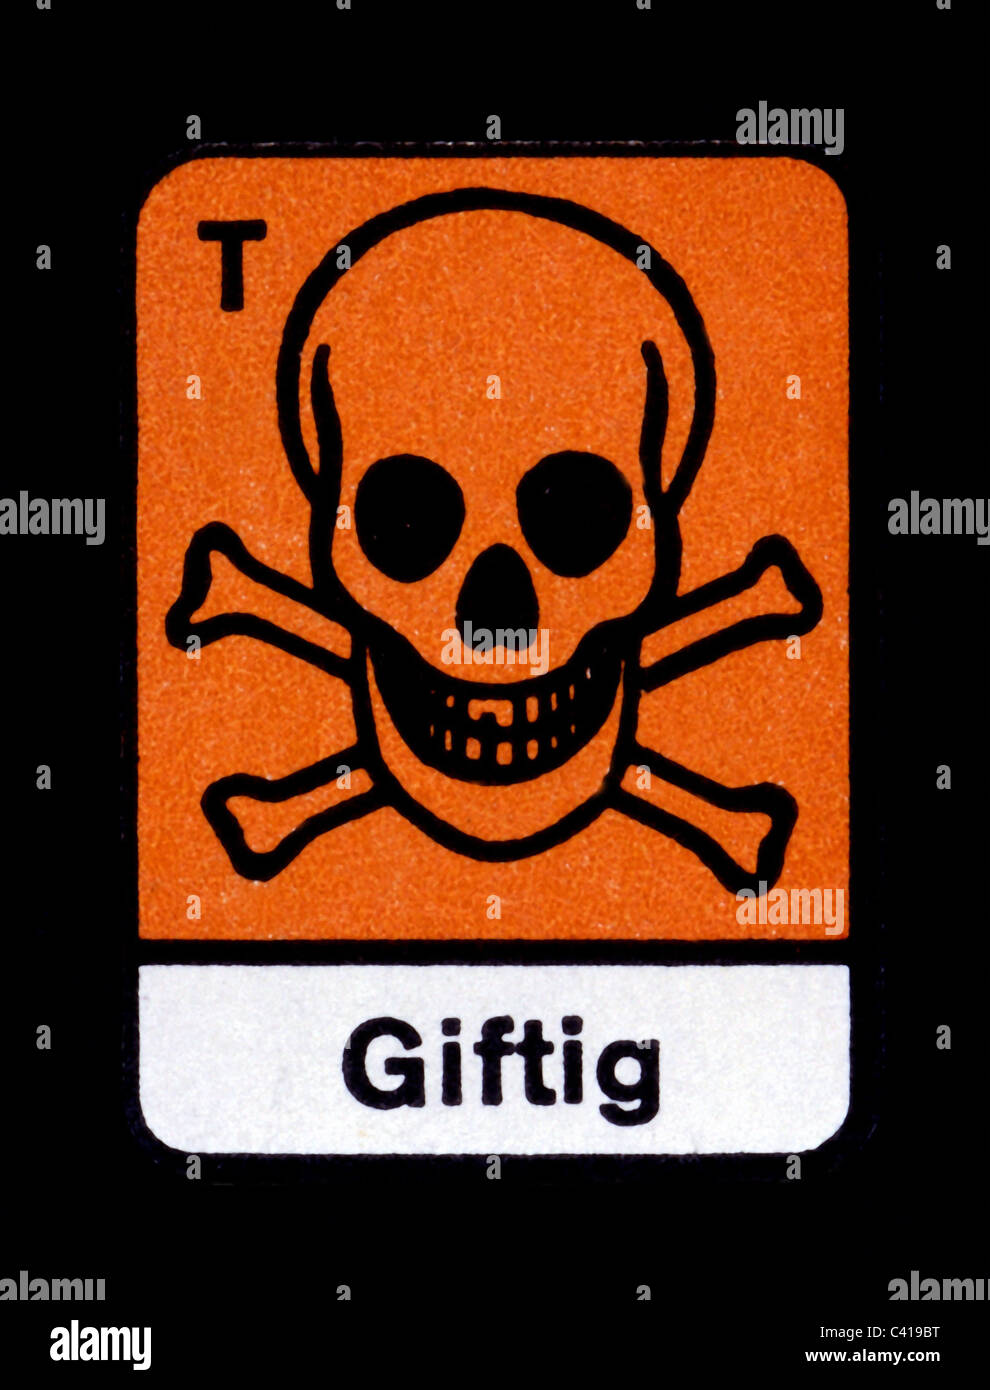 medicine, pharmacy, symbol, 'Giftig' (Toxic), orange / white, danger, dangers, clipping, cut out, cut-out, cut-outs, hazard symb Stock Photo